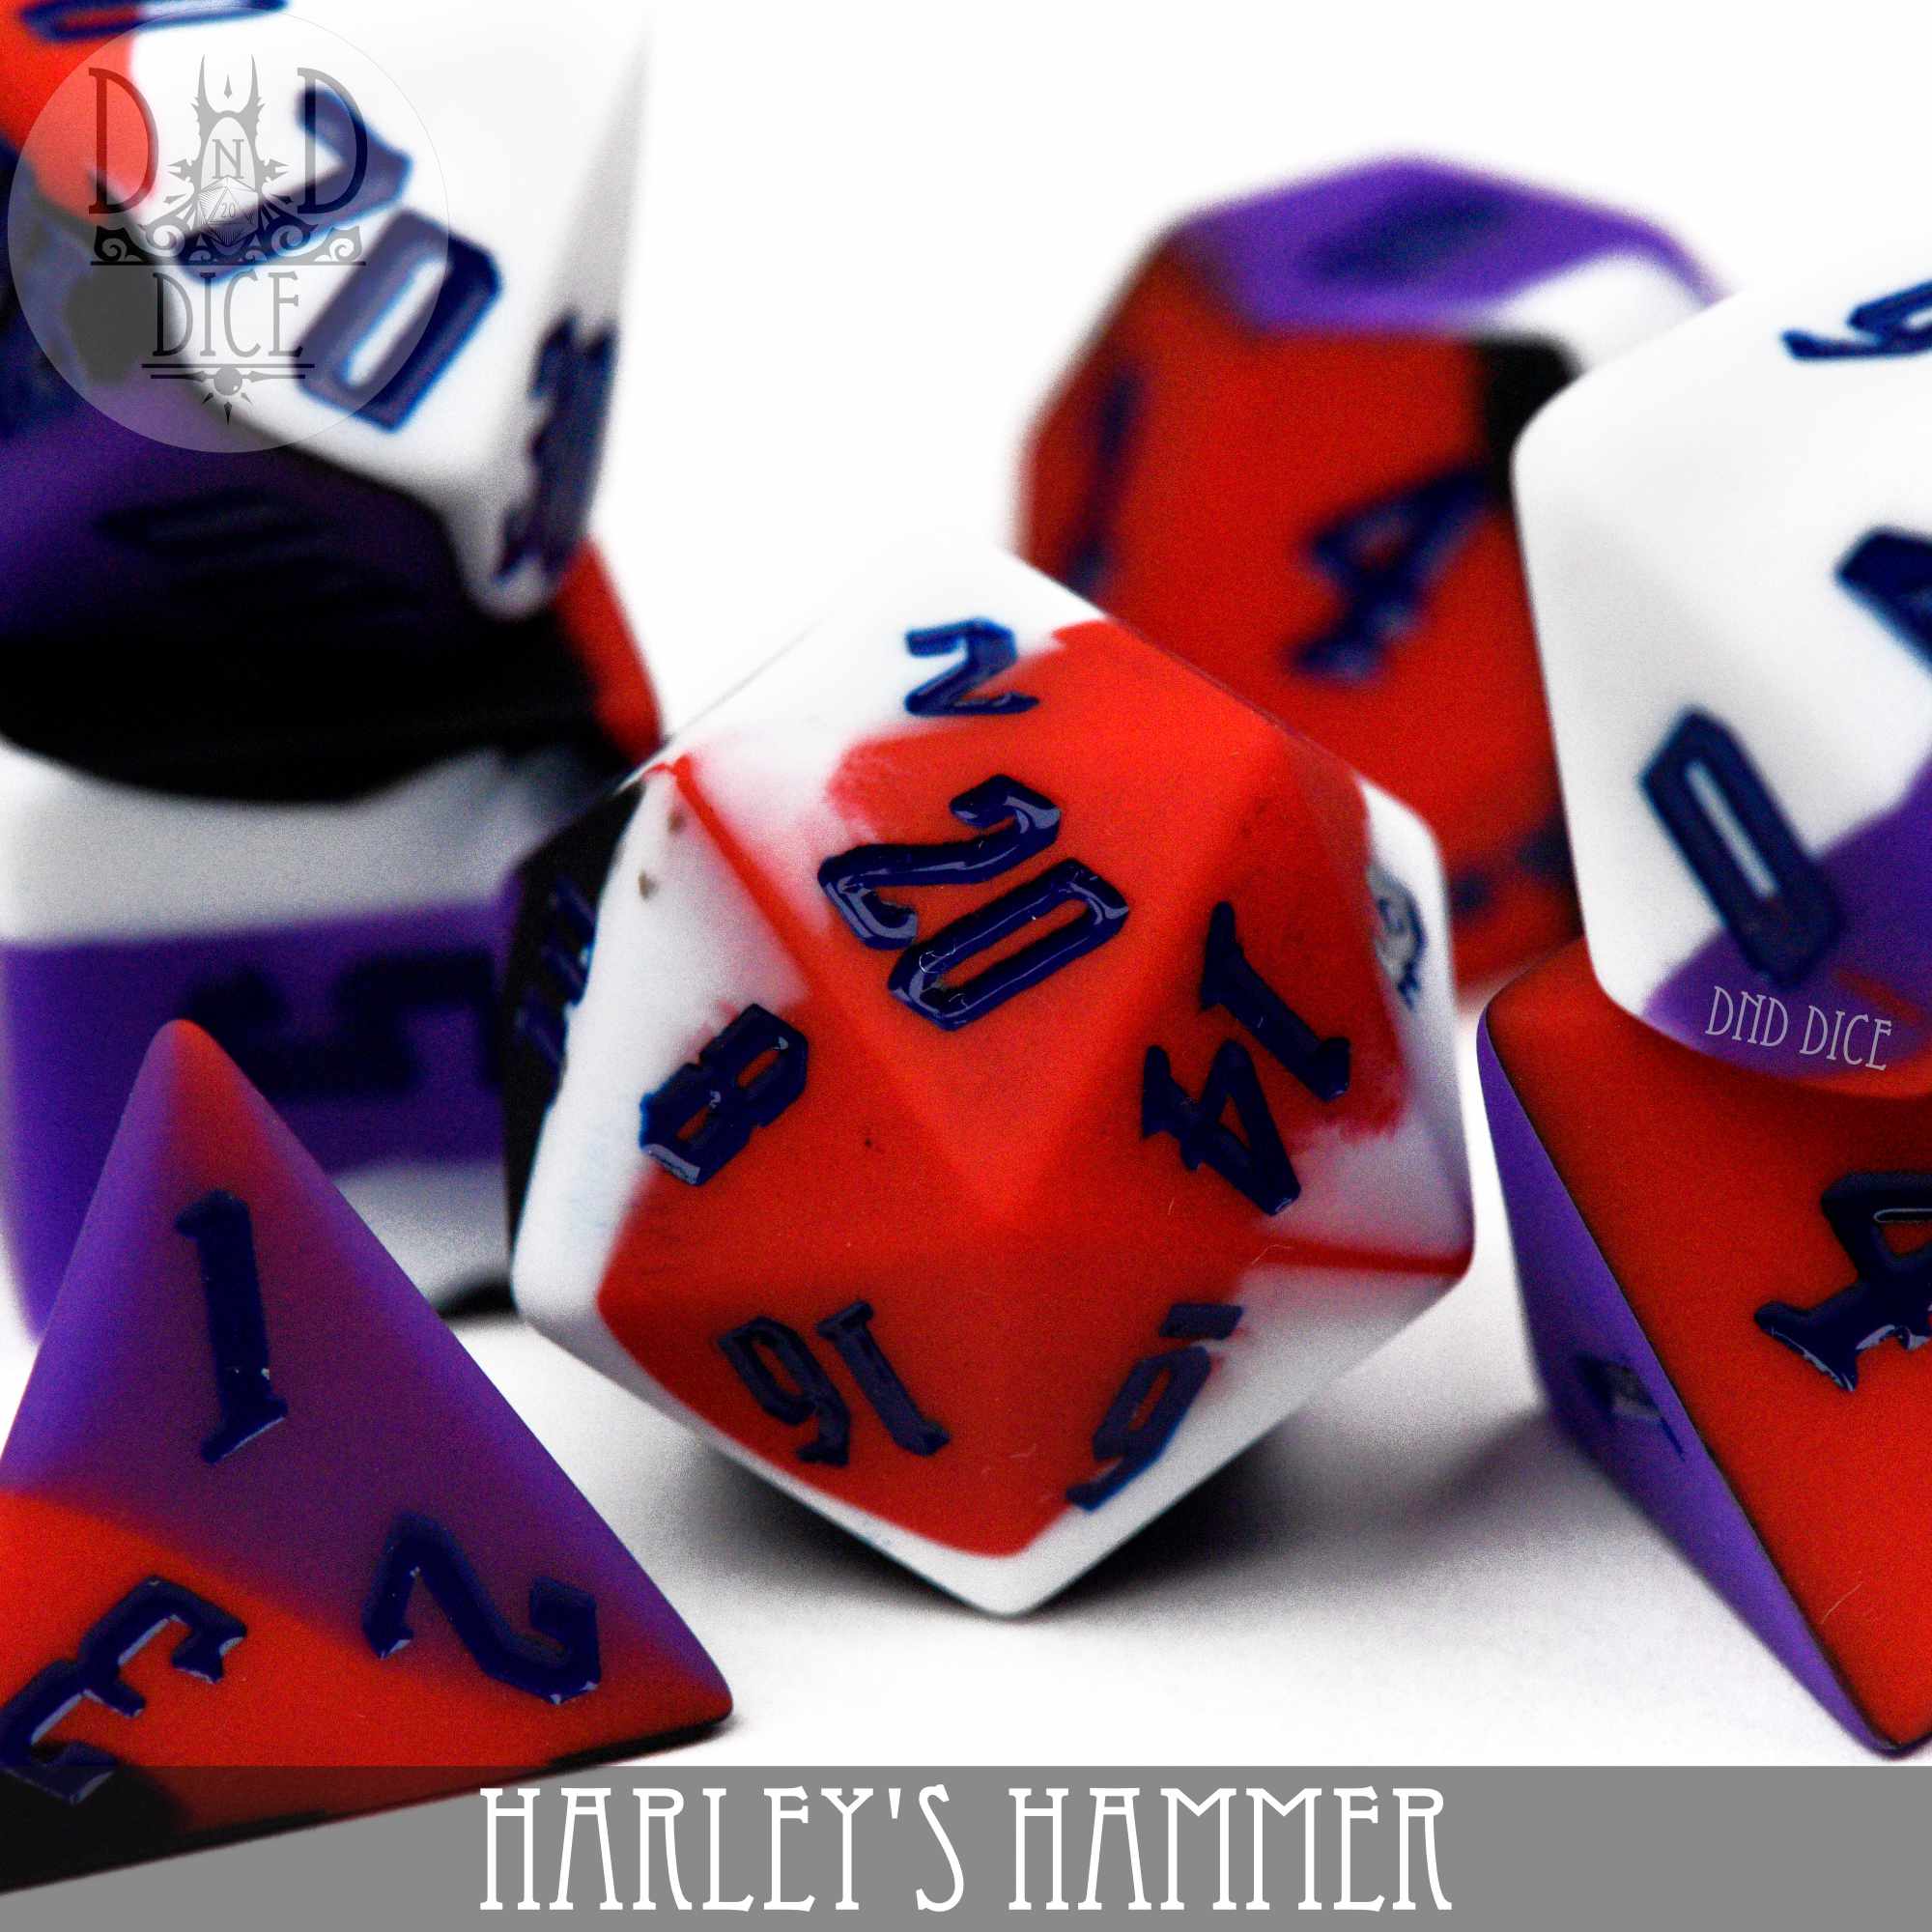 Harley's Hammer Silicone Dice Set